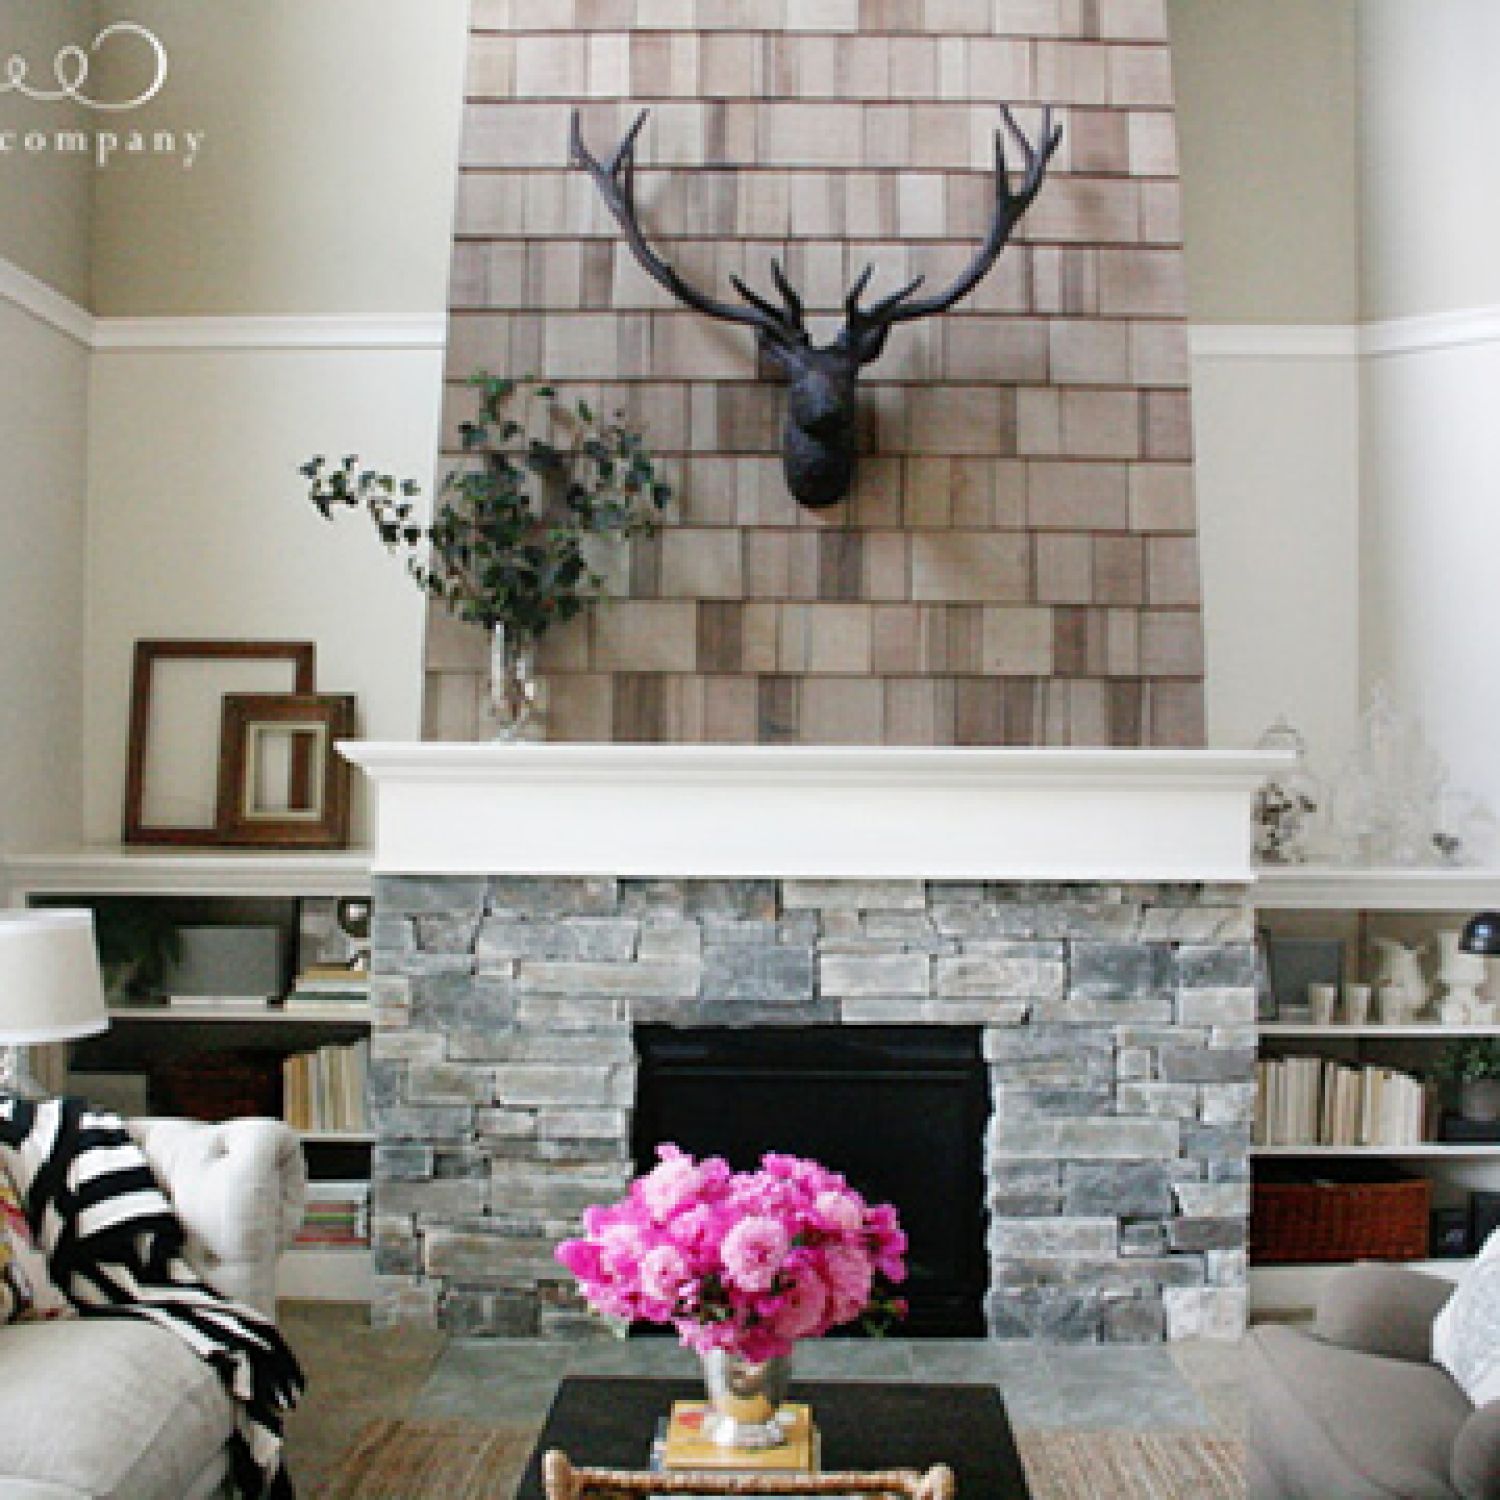 Reveal photos from several fireplace makeovers